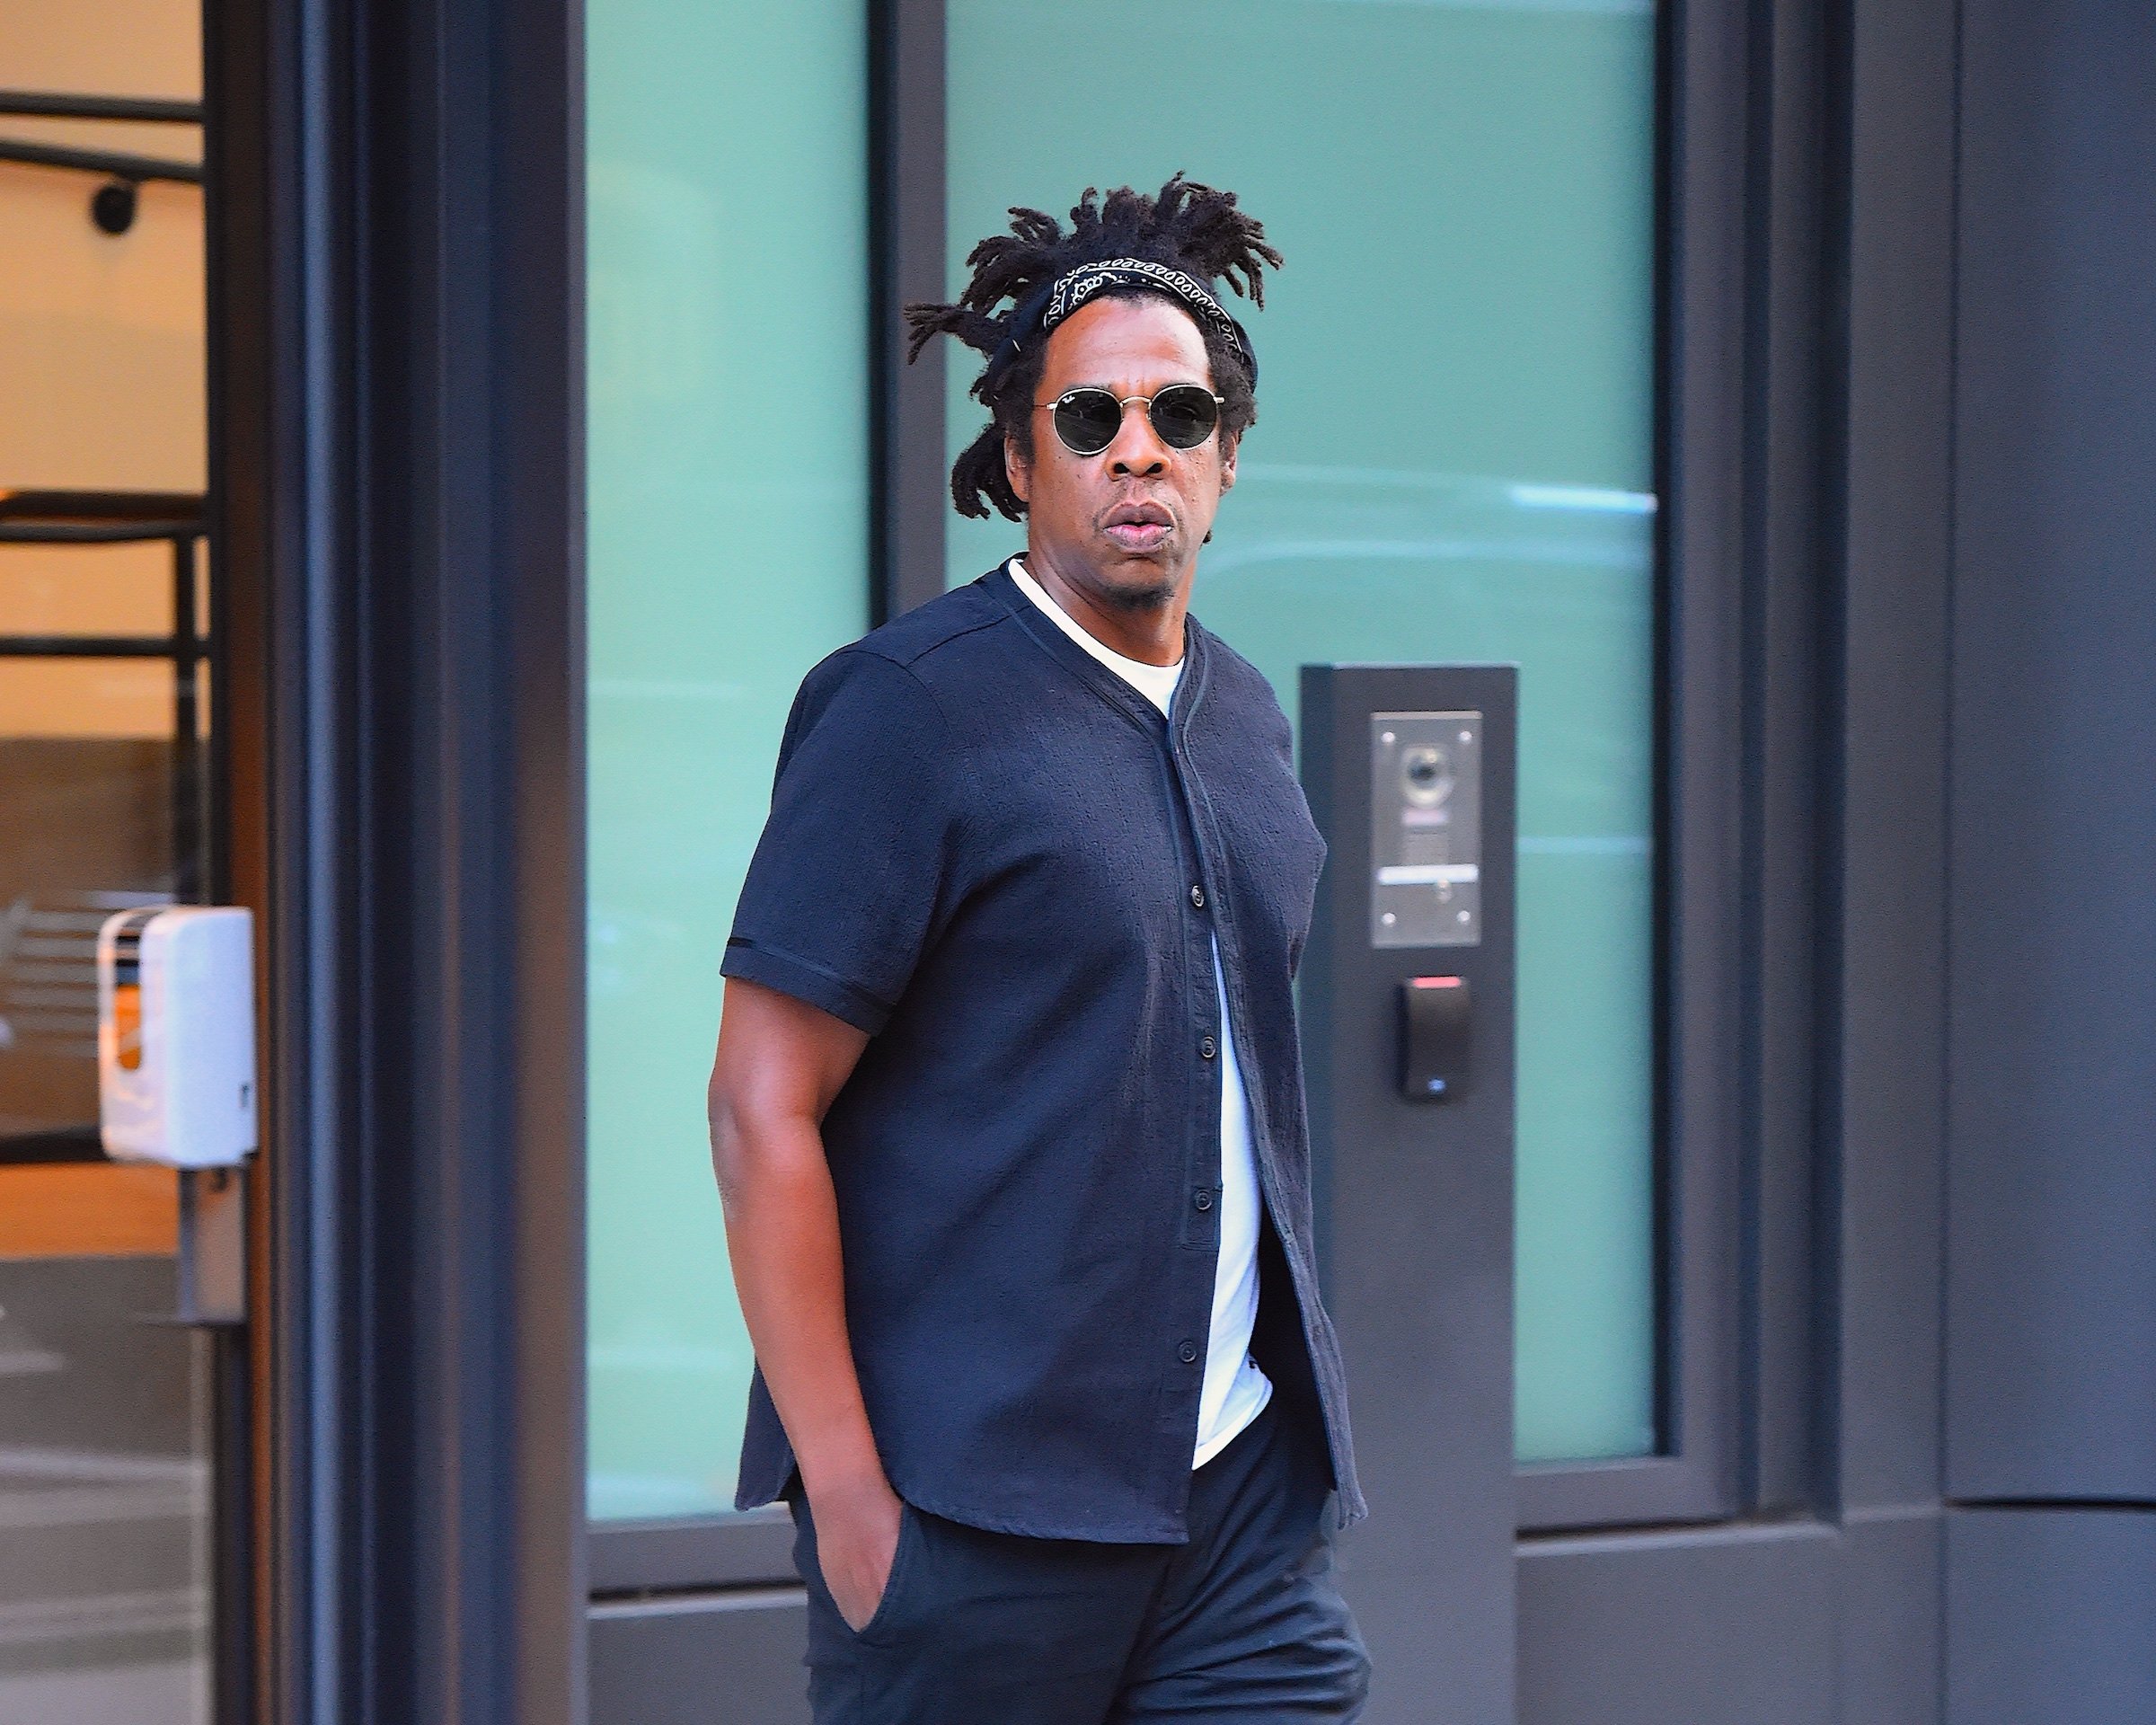 Jay-Z spotted on the streets of New York